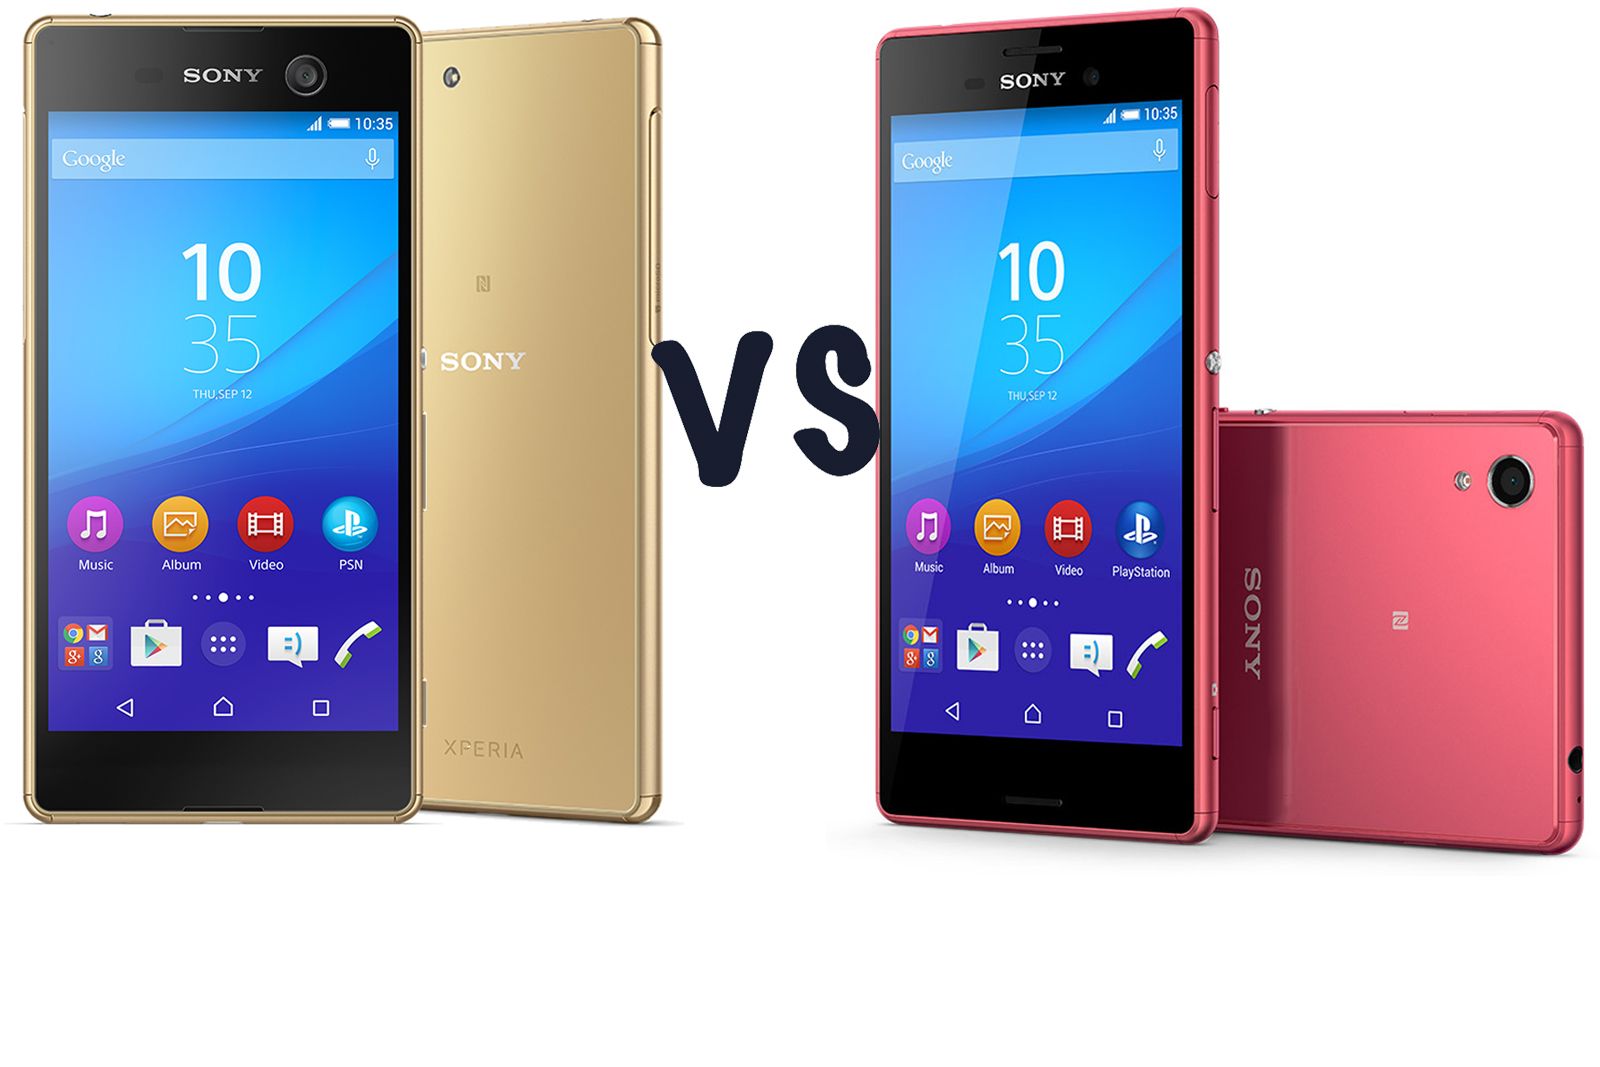 sony xperia m5 vs sony xperia m4 aqua what’s the difference  image 1